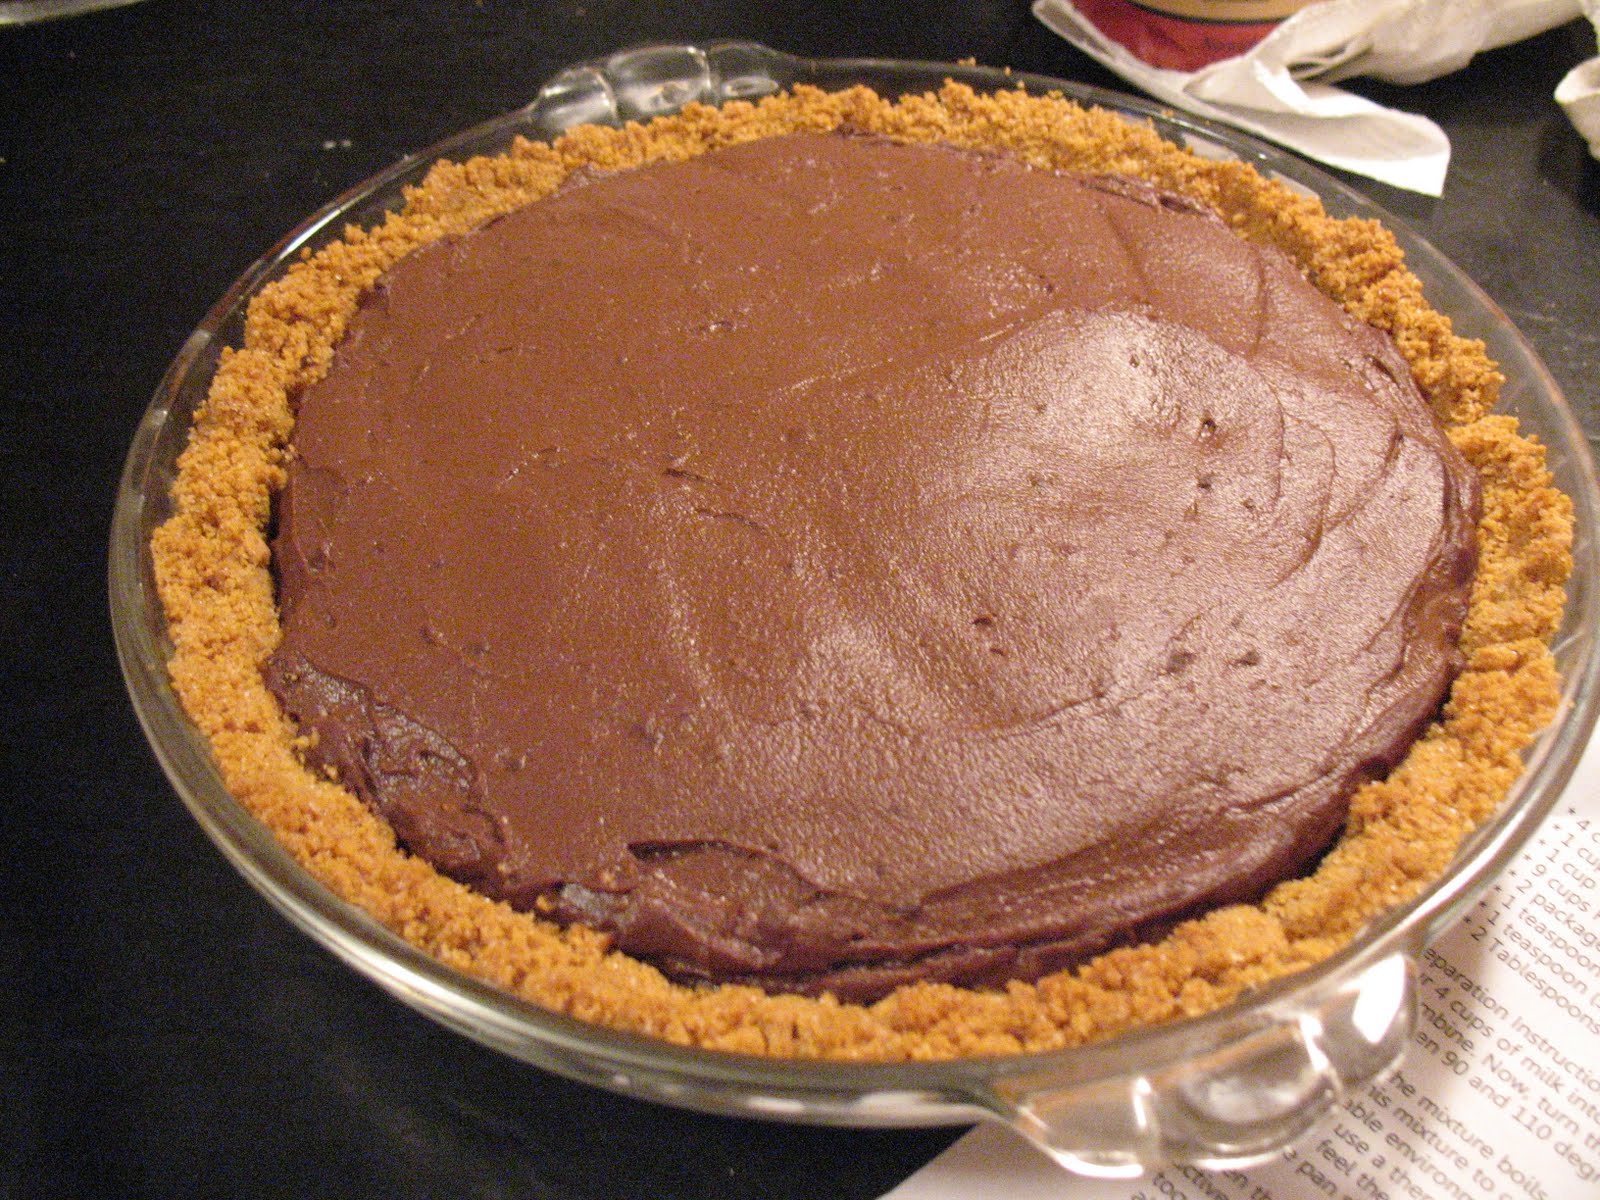 Sherry Starts Cooking: Chocolate Pudding Pie